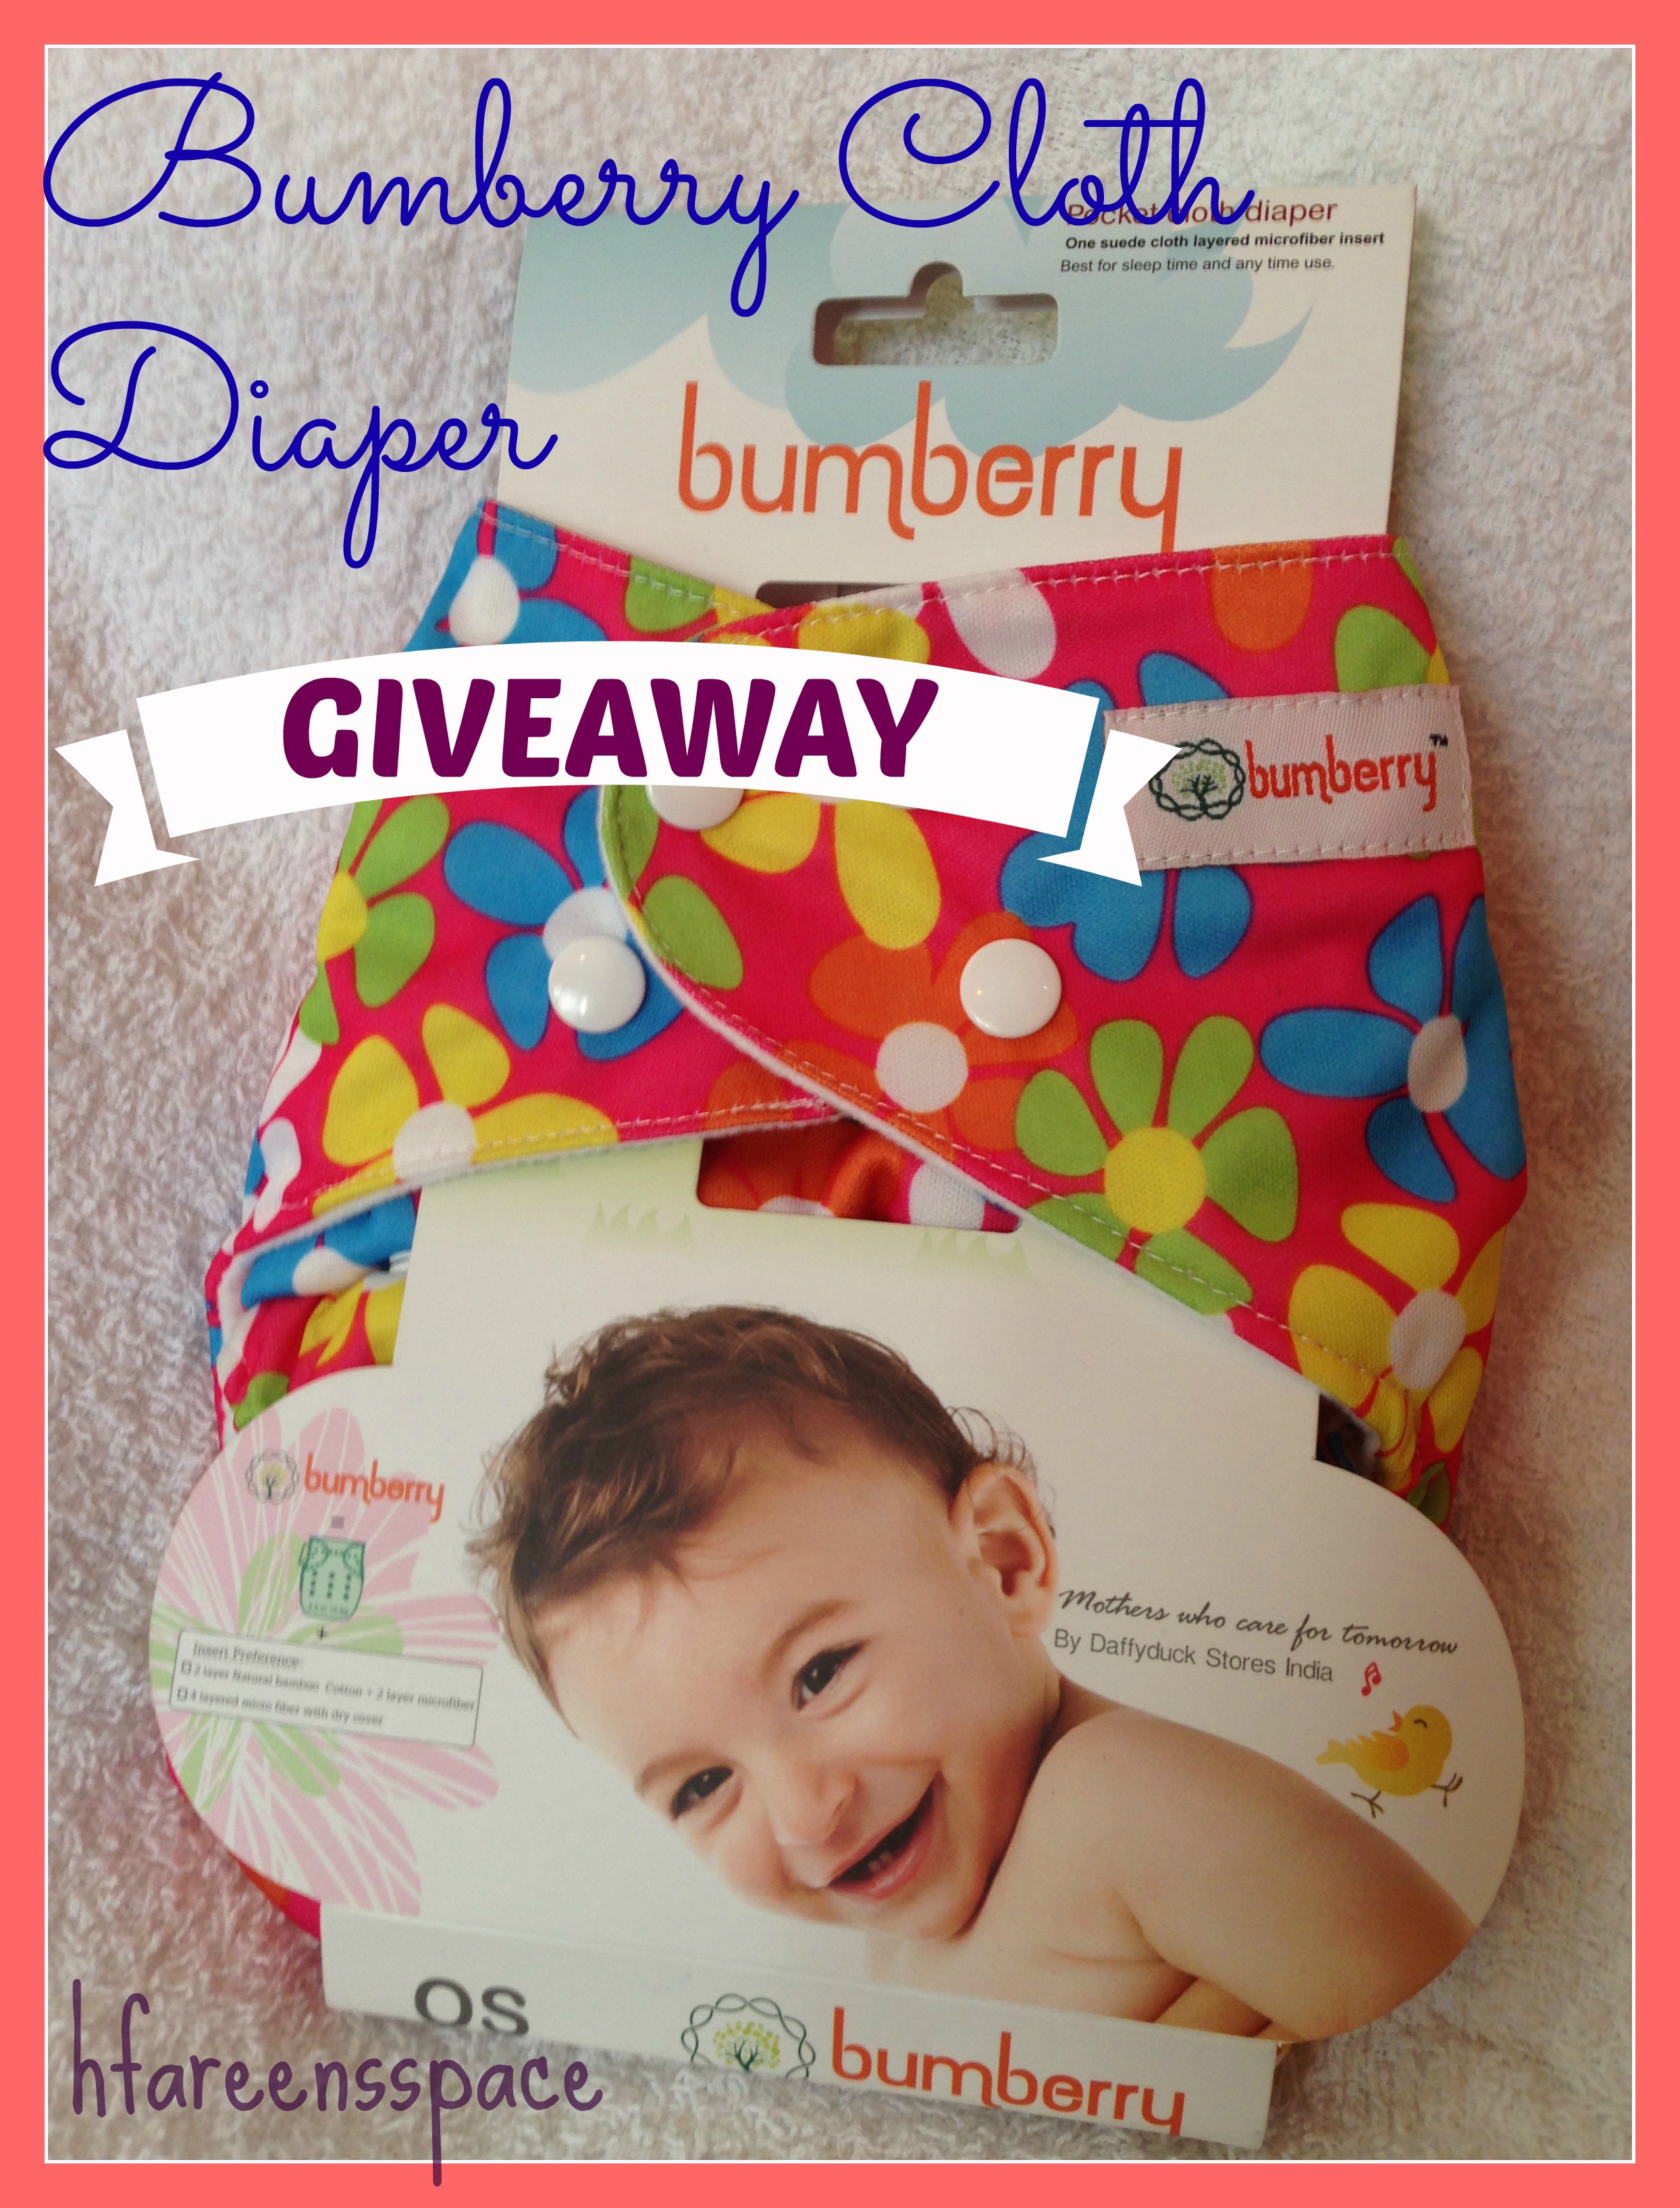 Bumberry Cloth Diaper (Giveaway)